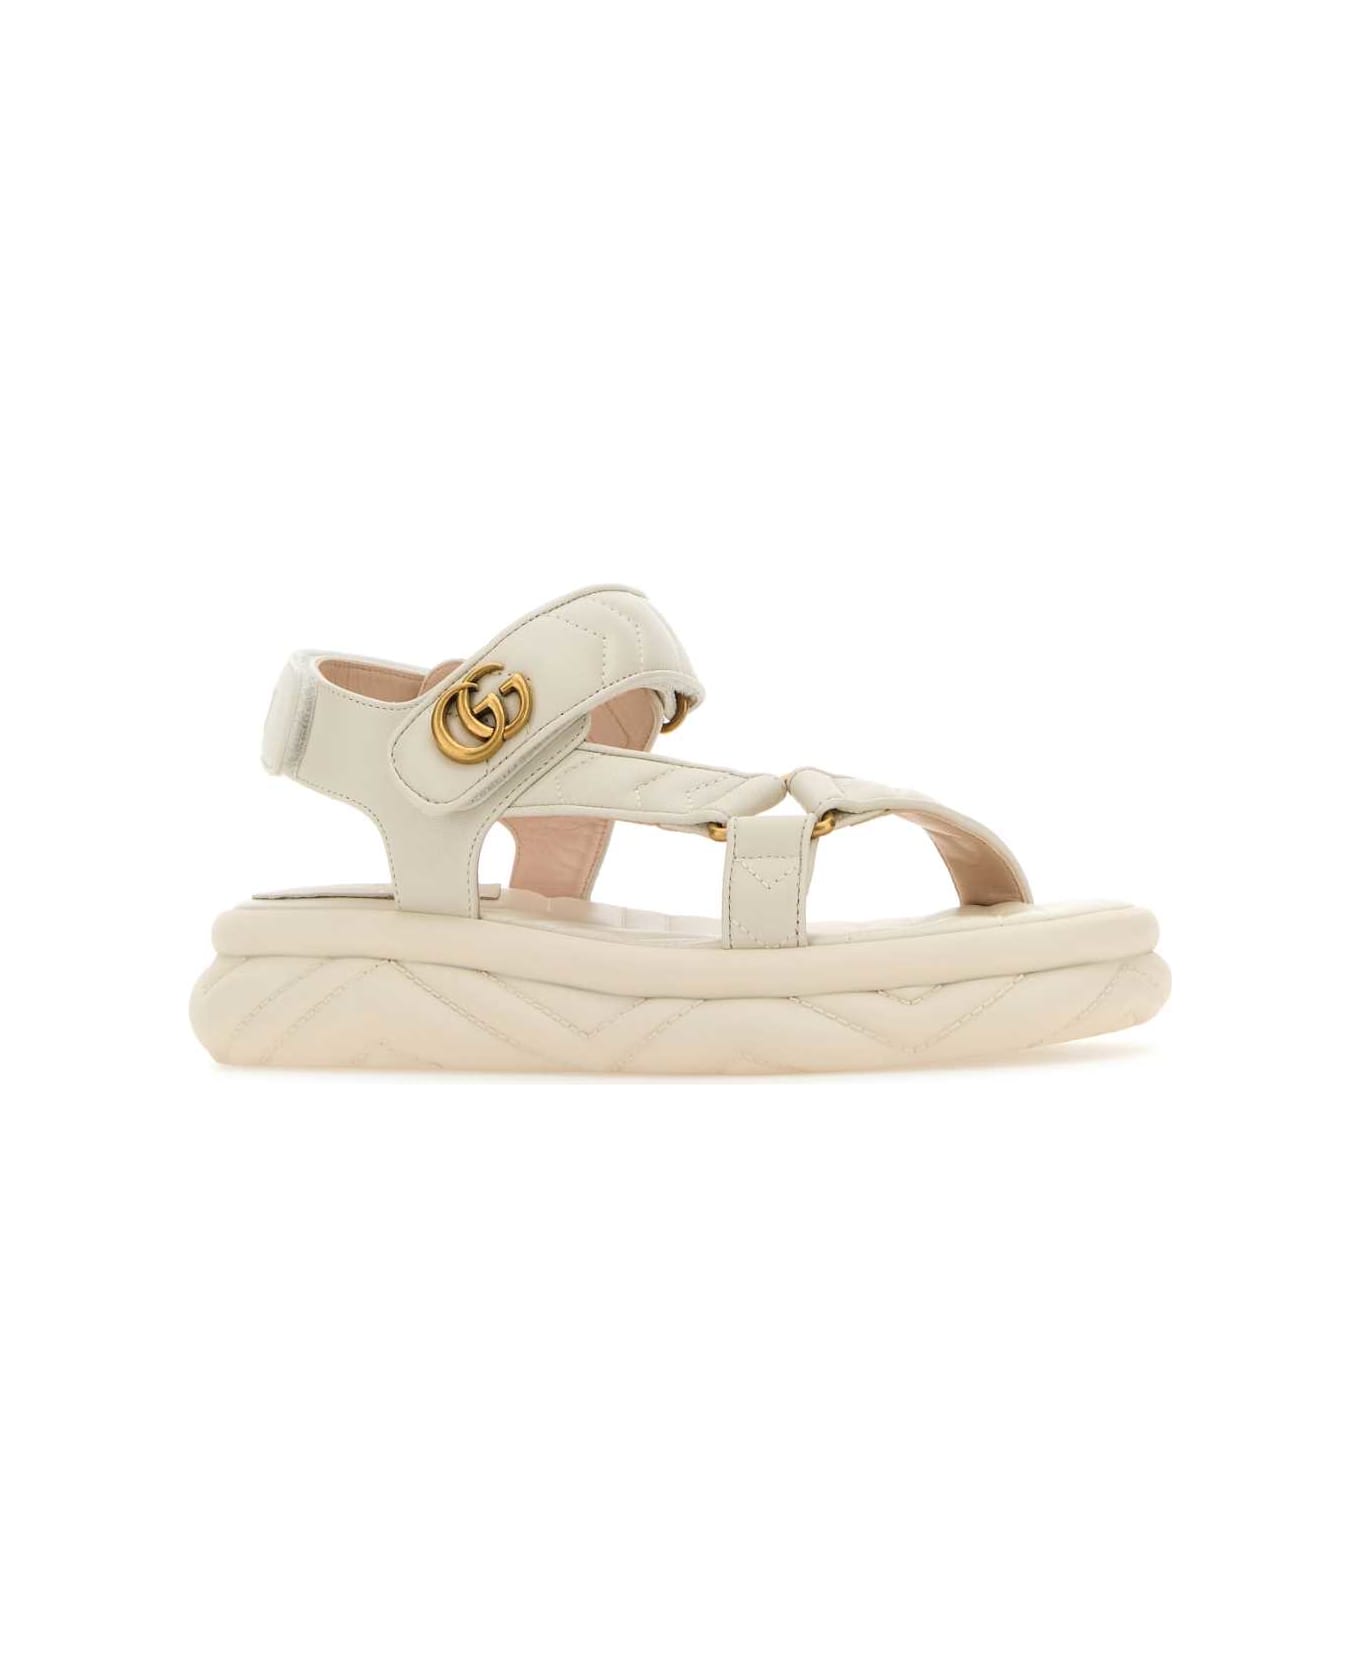 Gucci Ivory Leather Sandals - NMYWHINMYWHNM サンダル